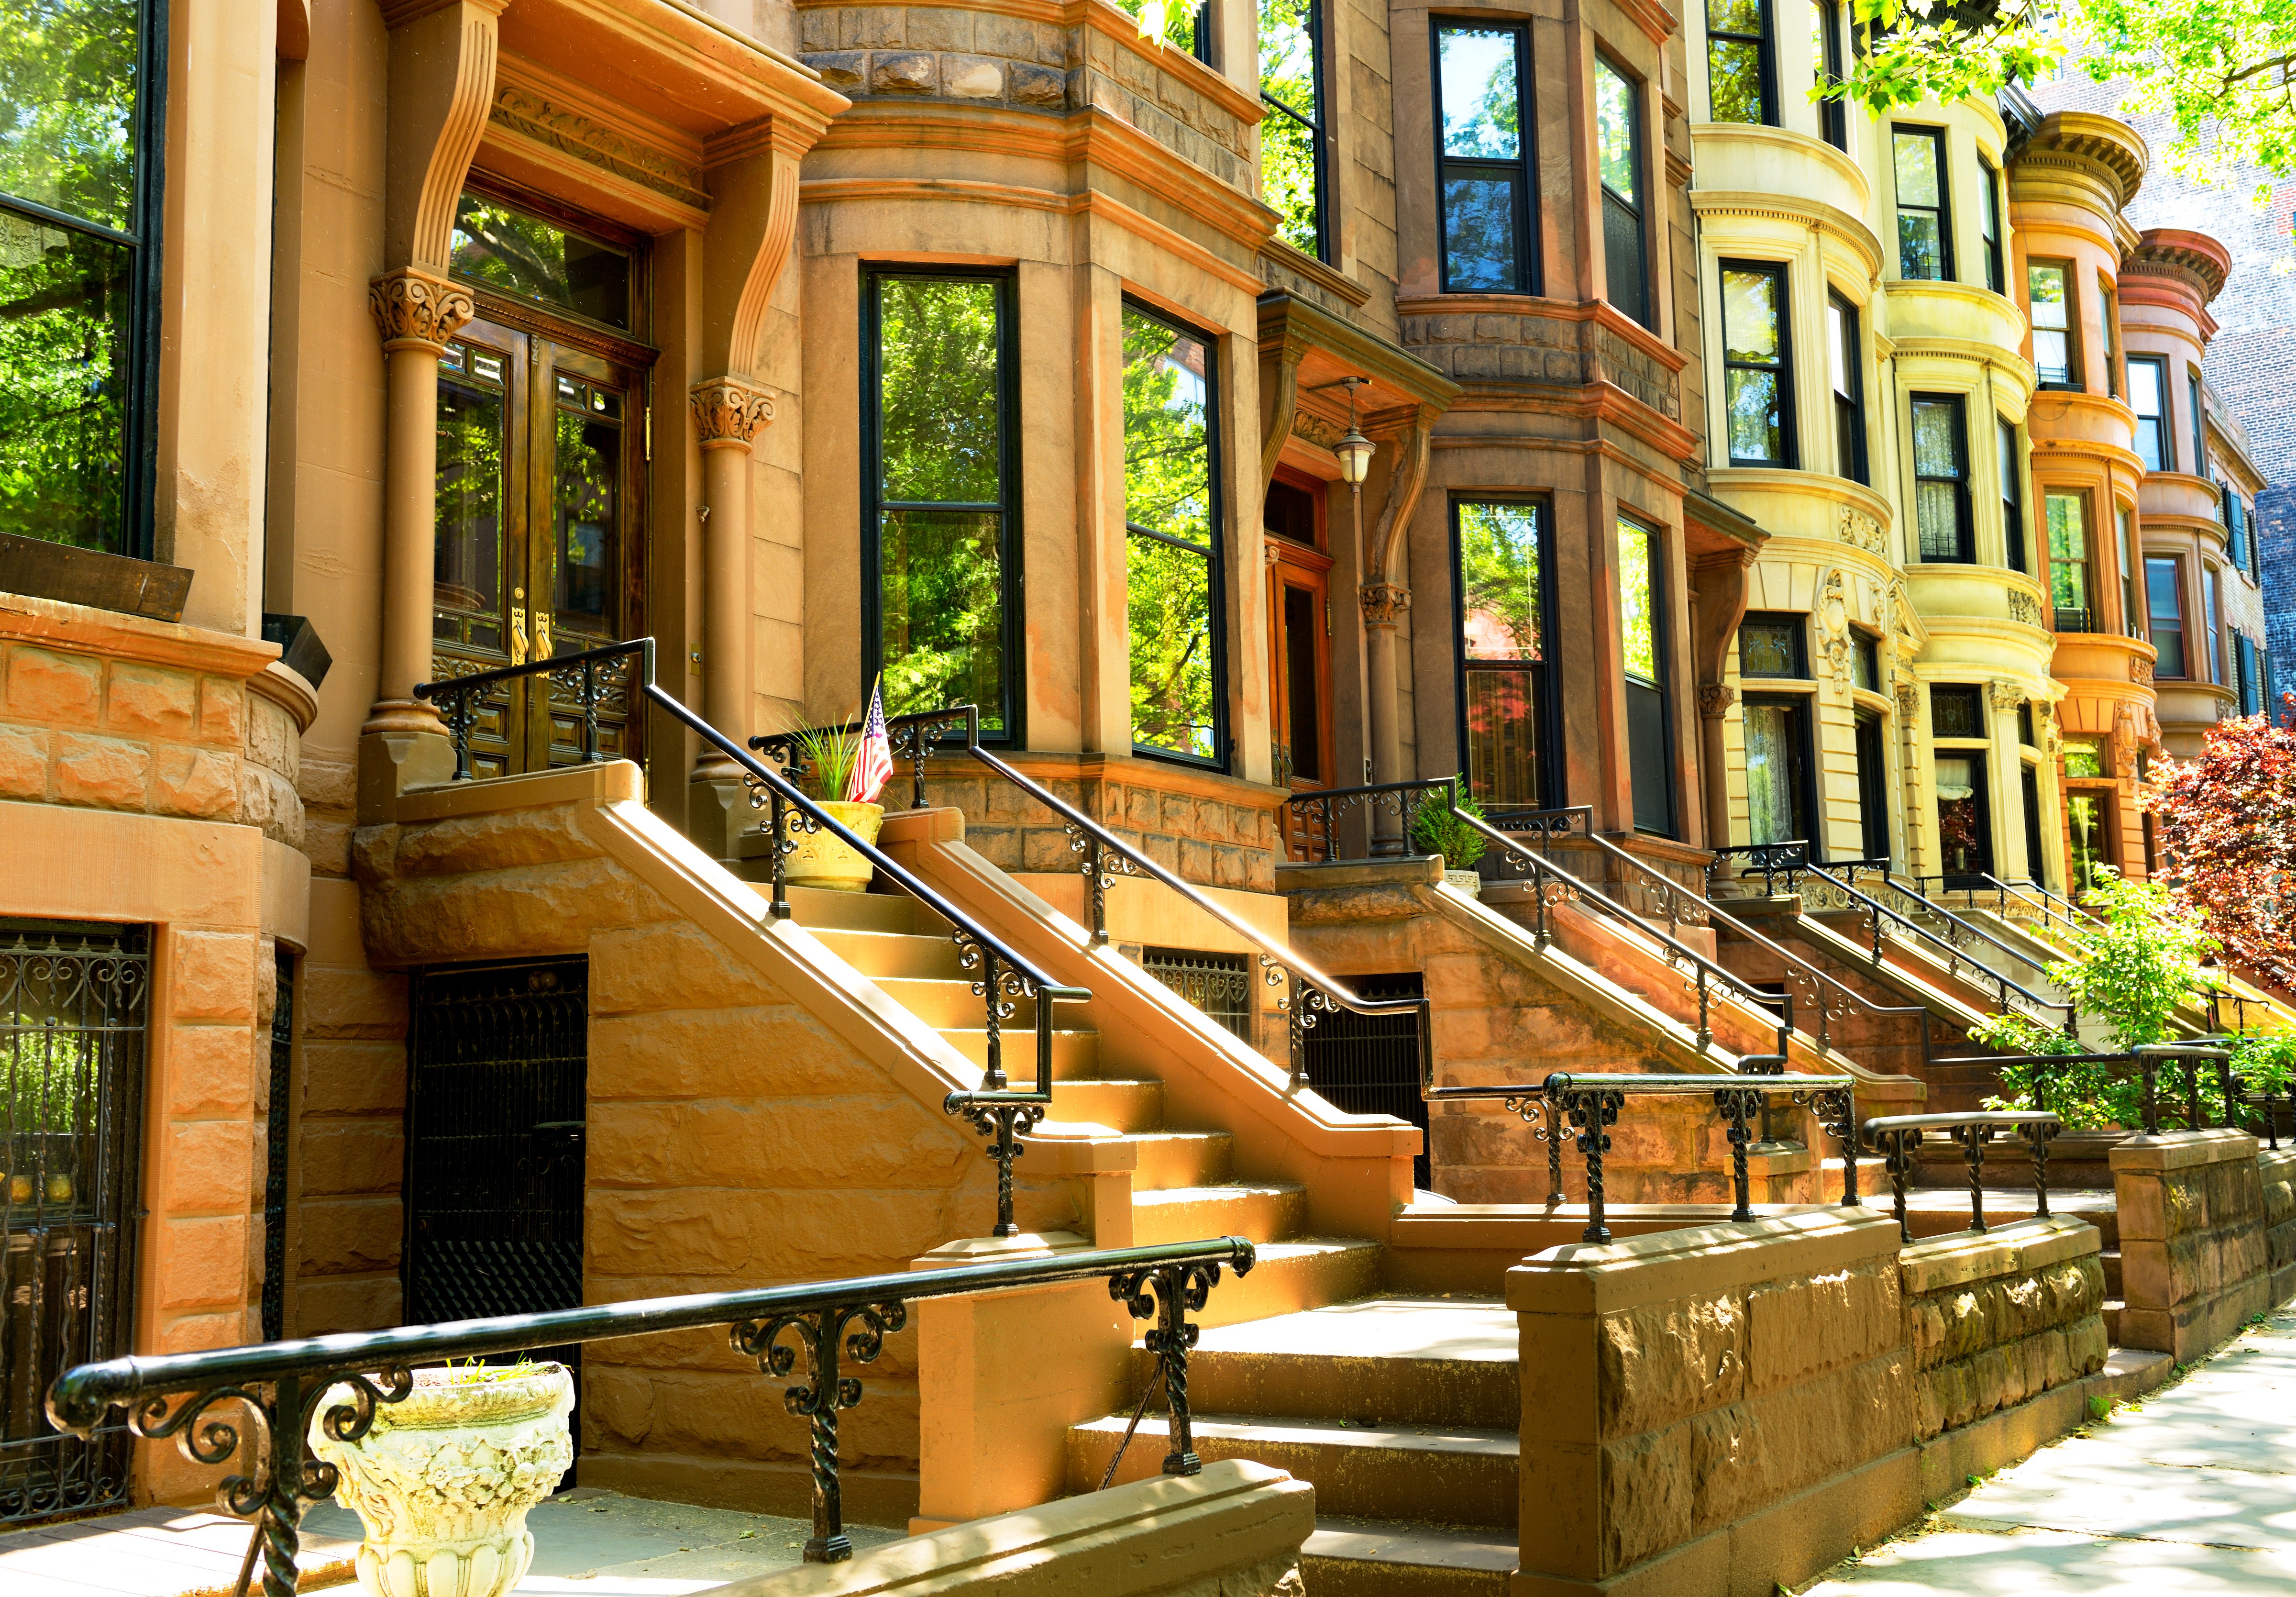 Brownstone in a row, Brooklyn, NYC, USA. (Getty Images)